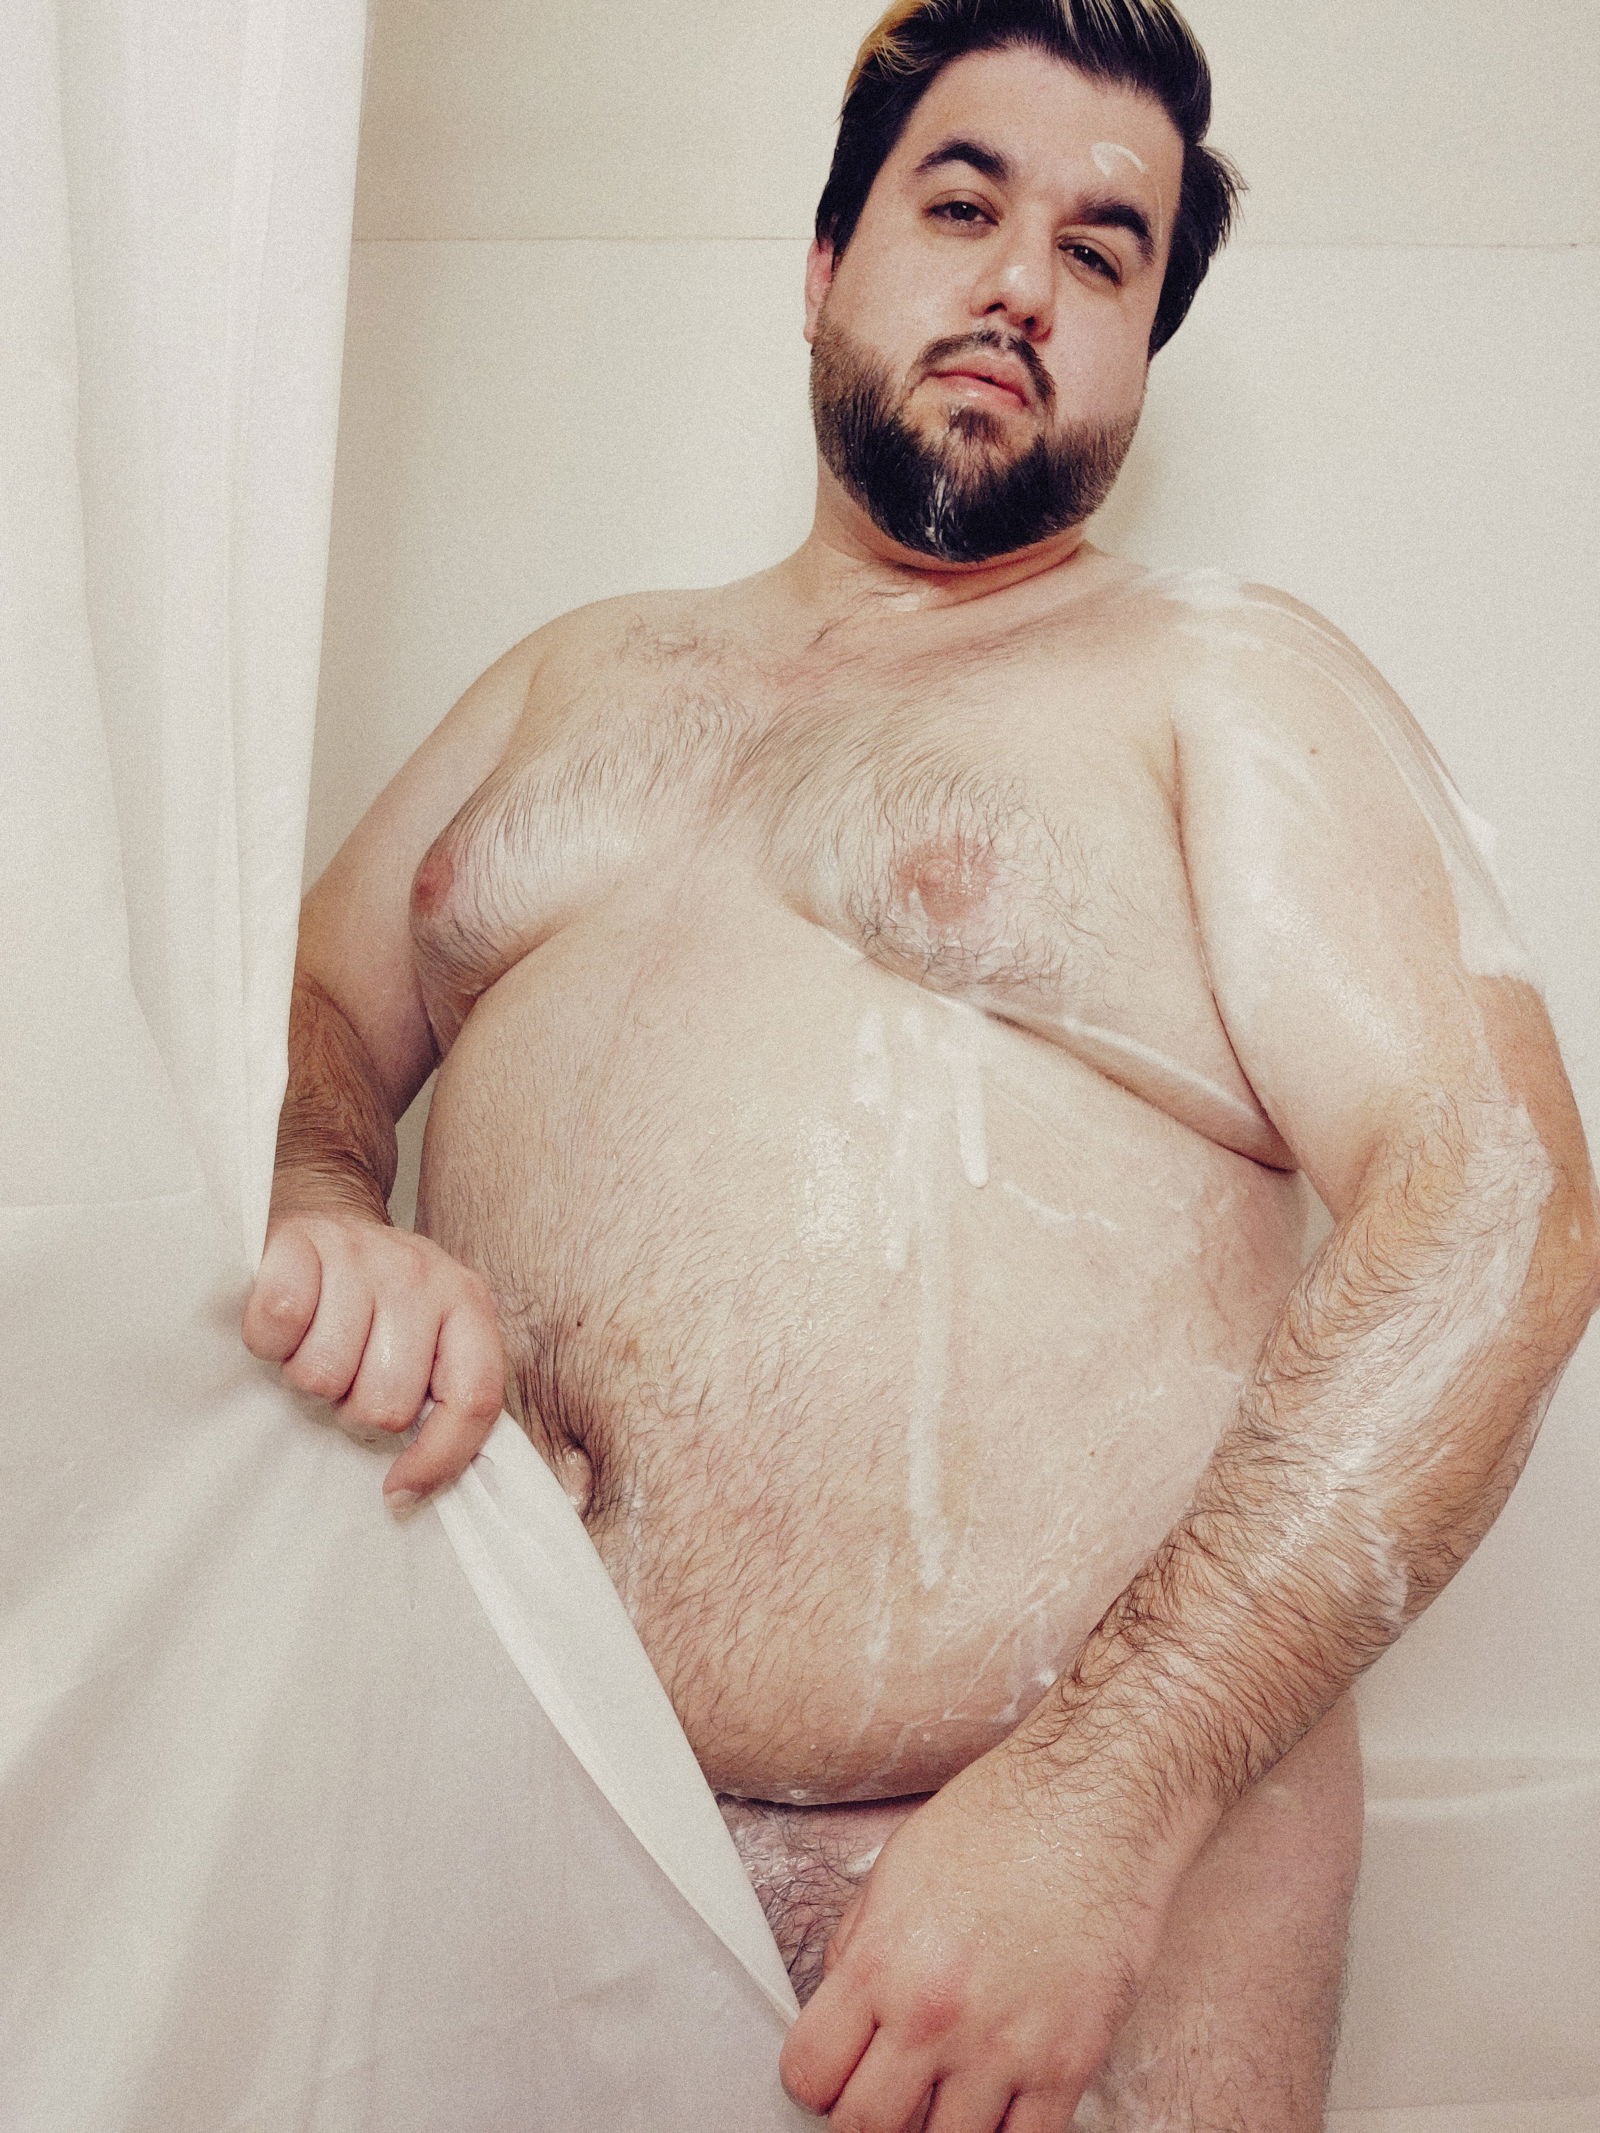 Photo by TheBearWannabe with the username @TheBearWannabe, who is a star user,  April 30, 2019 at 9:55 PM. The post is about the topic Bears Cubs and More and the text says 'Sharesome! I've missed you - Have a recent photo shoot of me actually being clean for once. Always down to have someone join me, though <3'